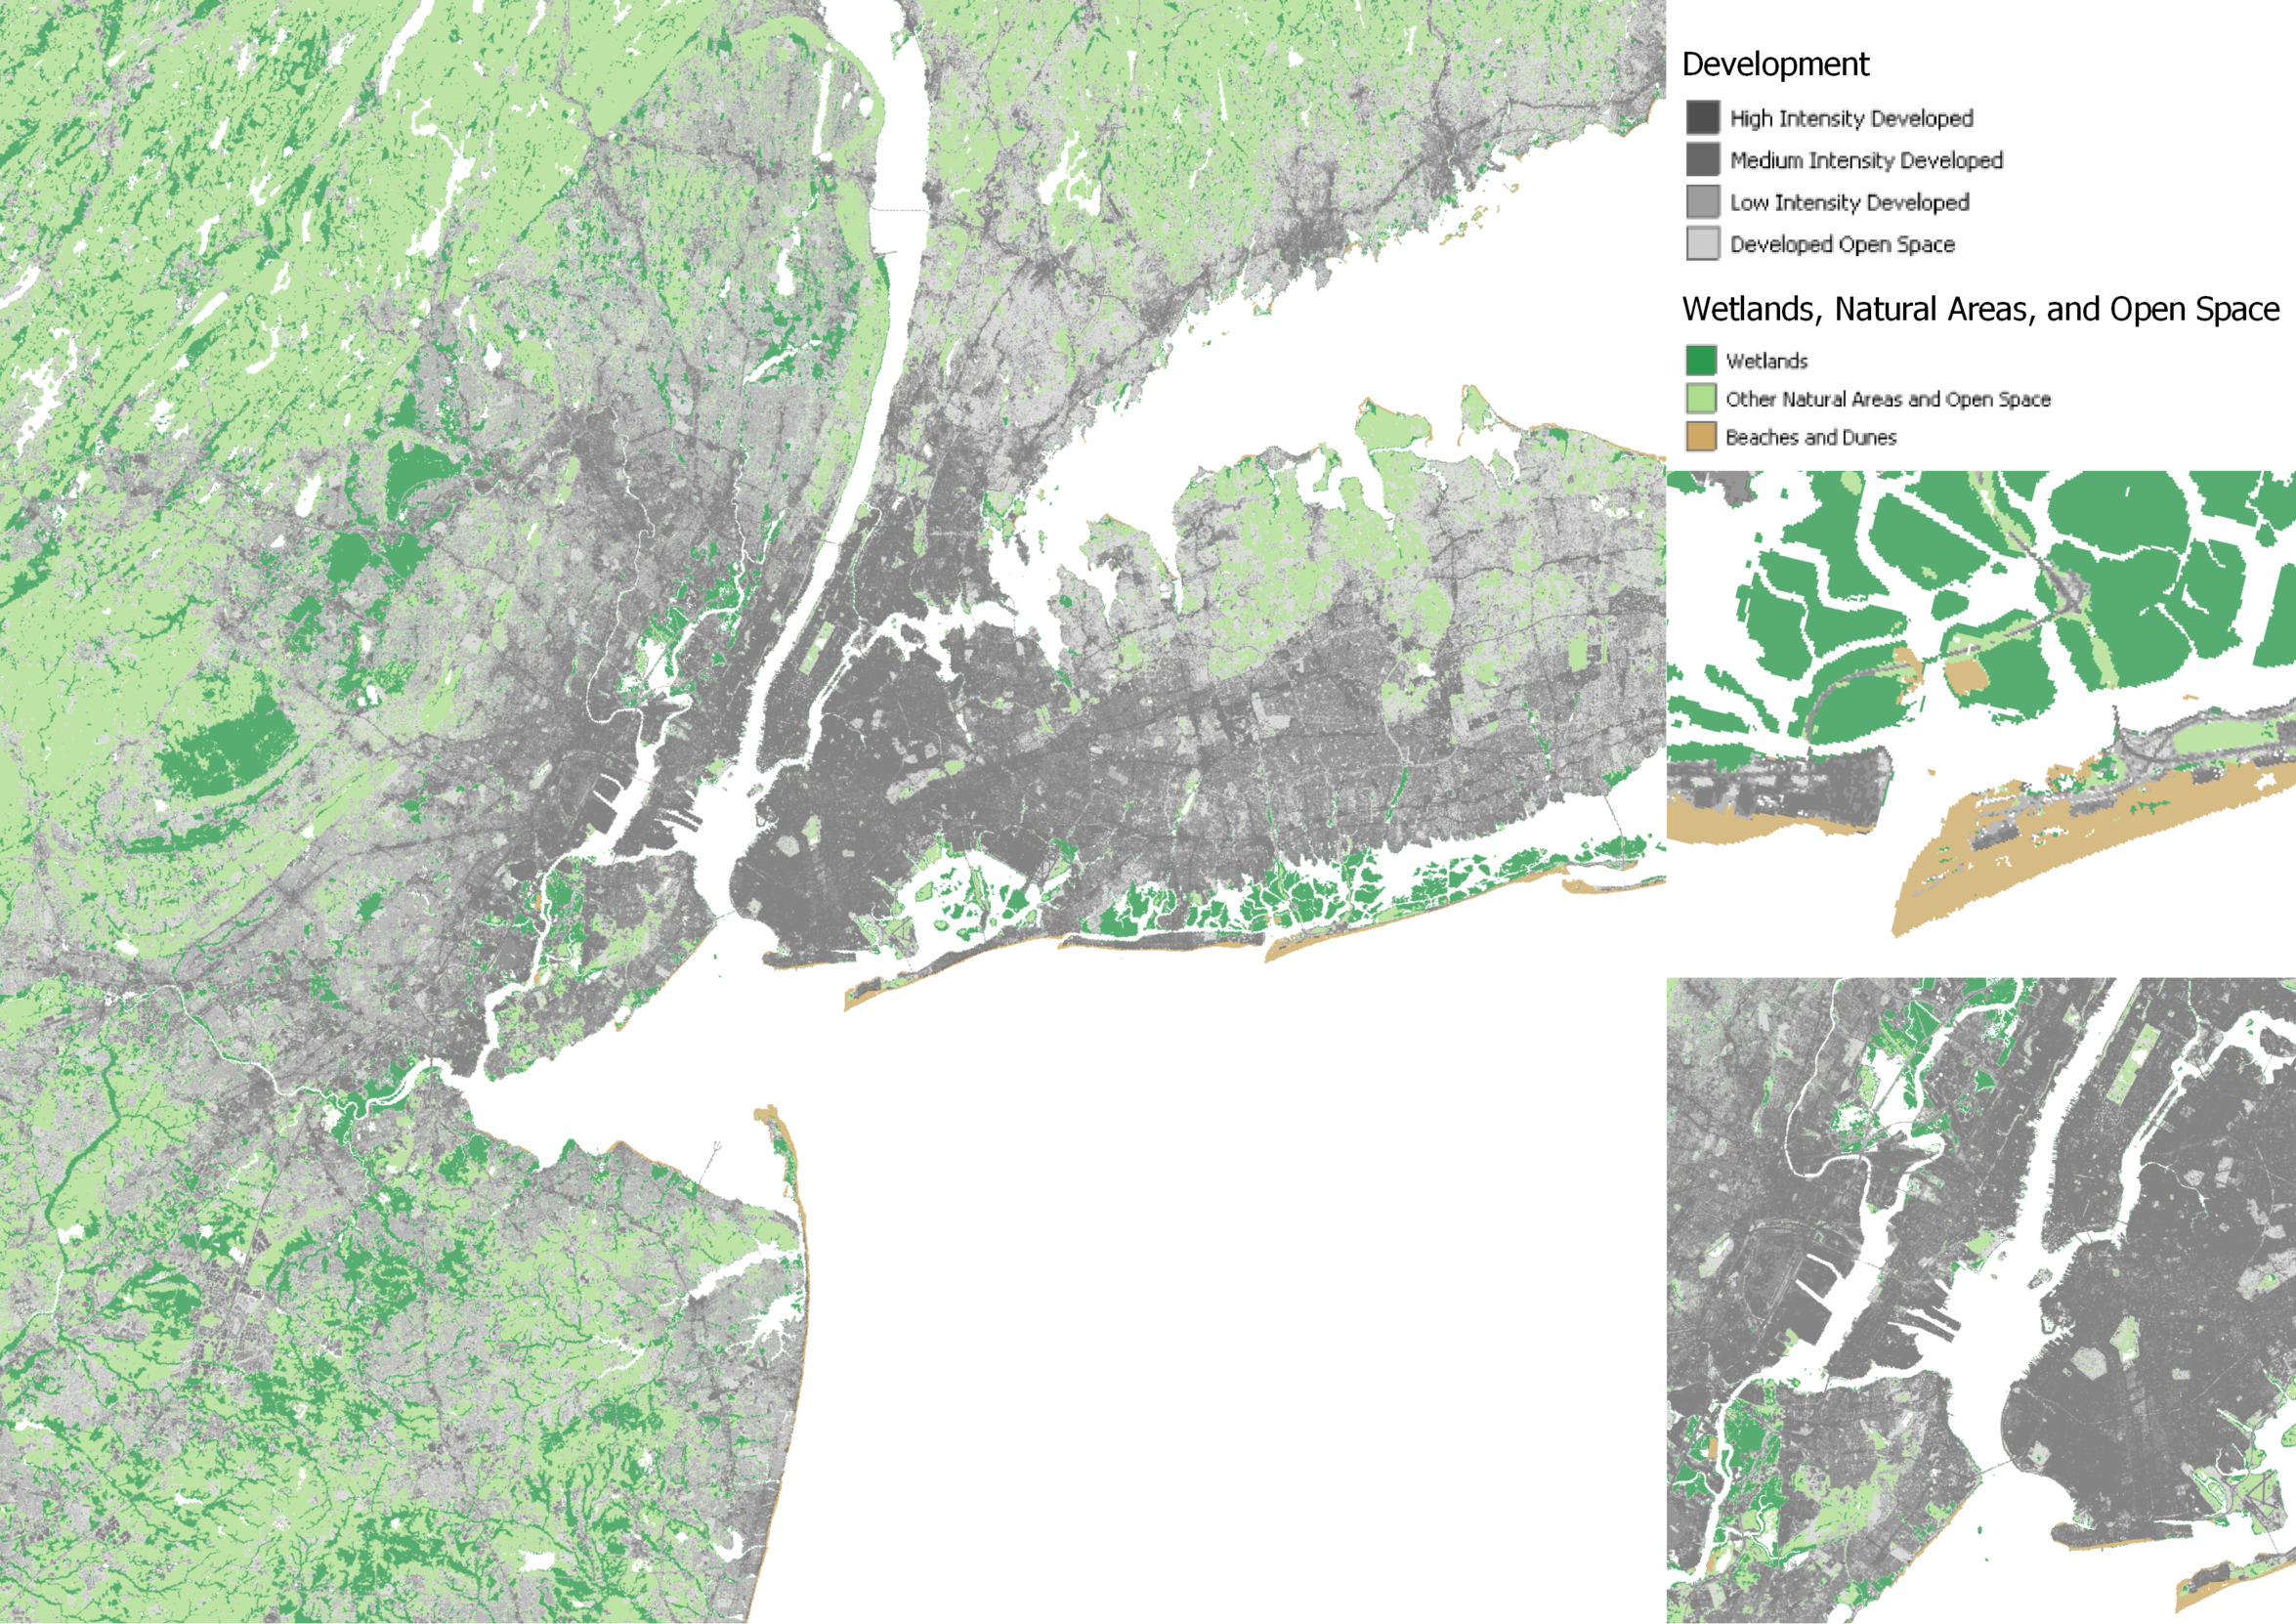 Natural Areas and Development Intensity